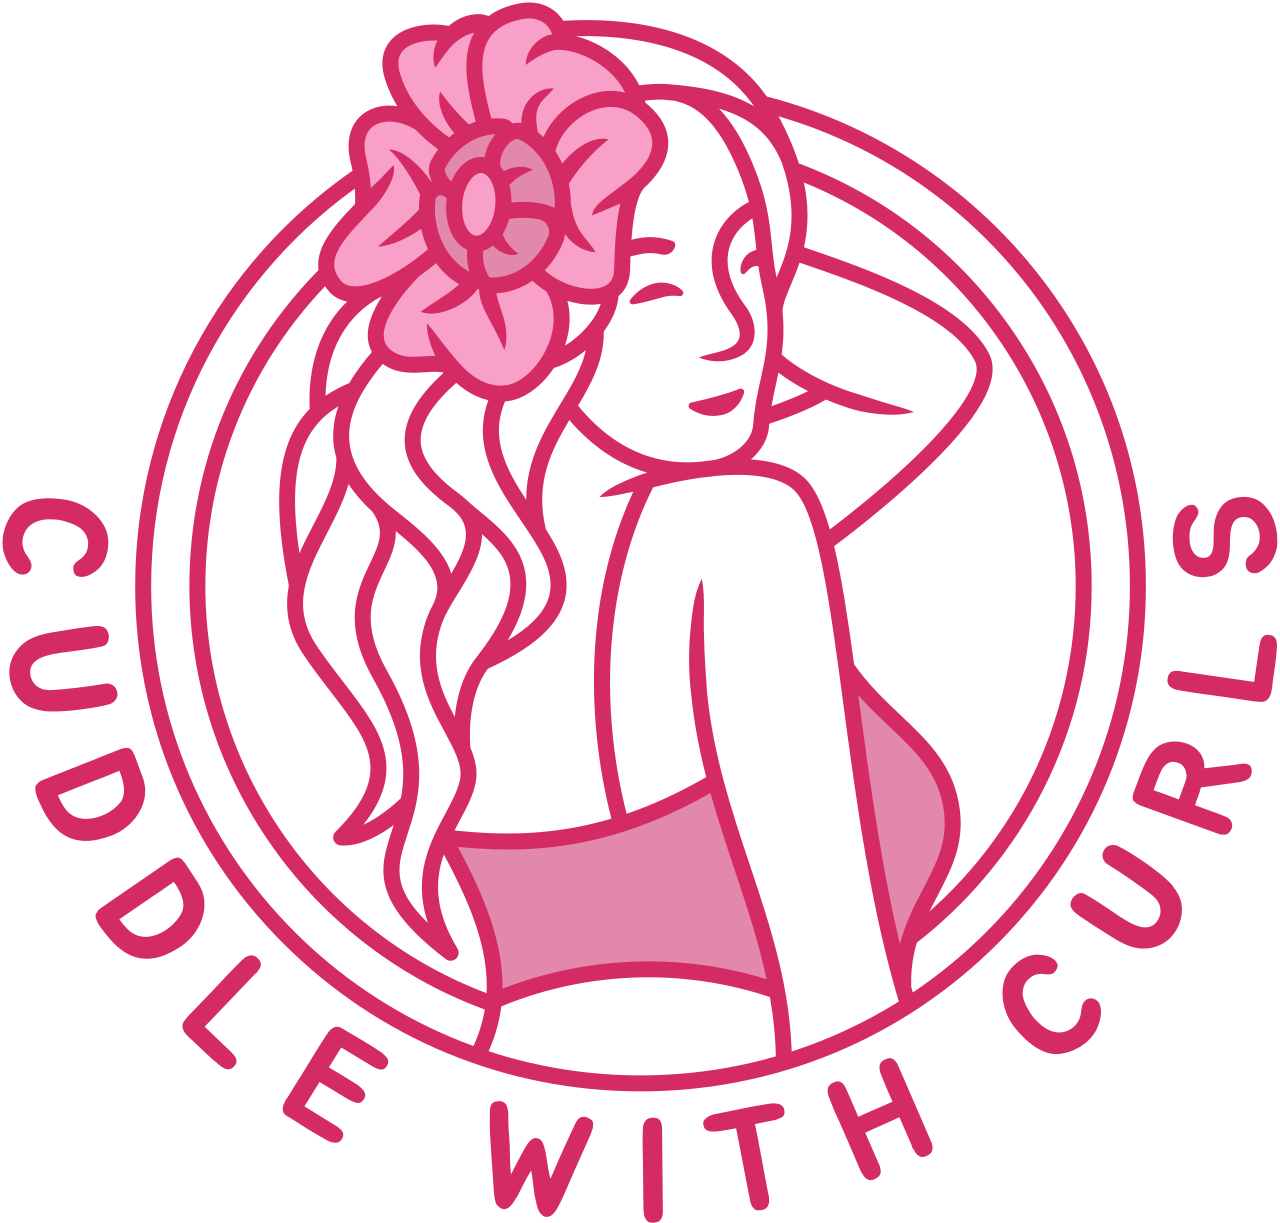 Cuddle with curls's logo